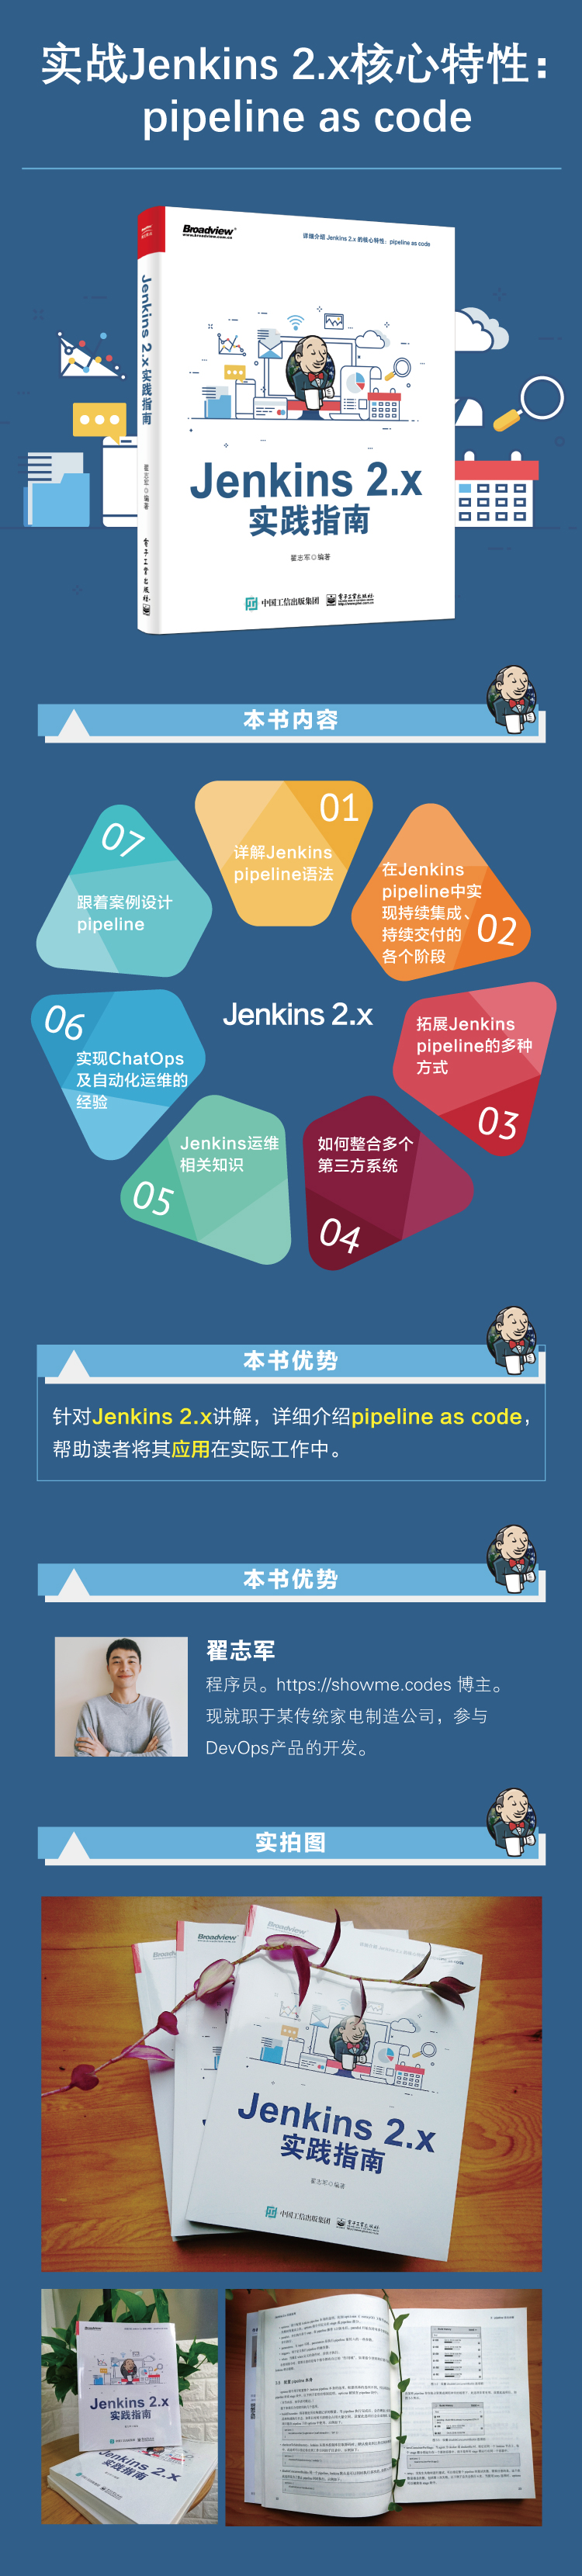 wechat/images/articles/2019/05/2019-05-13-jenkins-book-gift/book-introduce.png